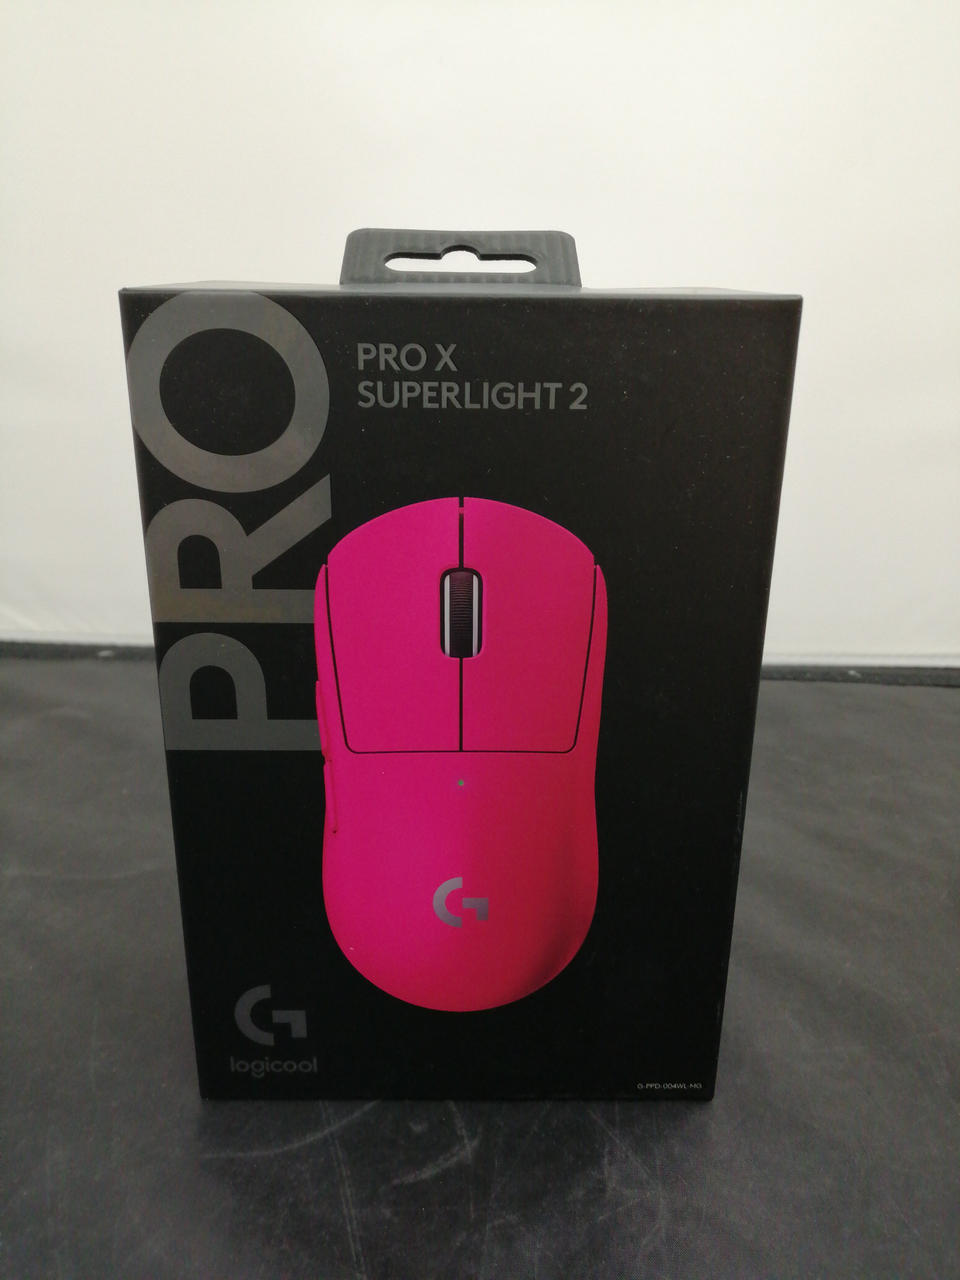 Logicool G PRO X Superlight 2 Wireless Gaming Mouse Pink Good Condition Used